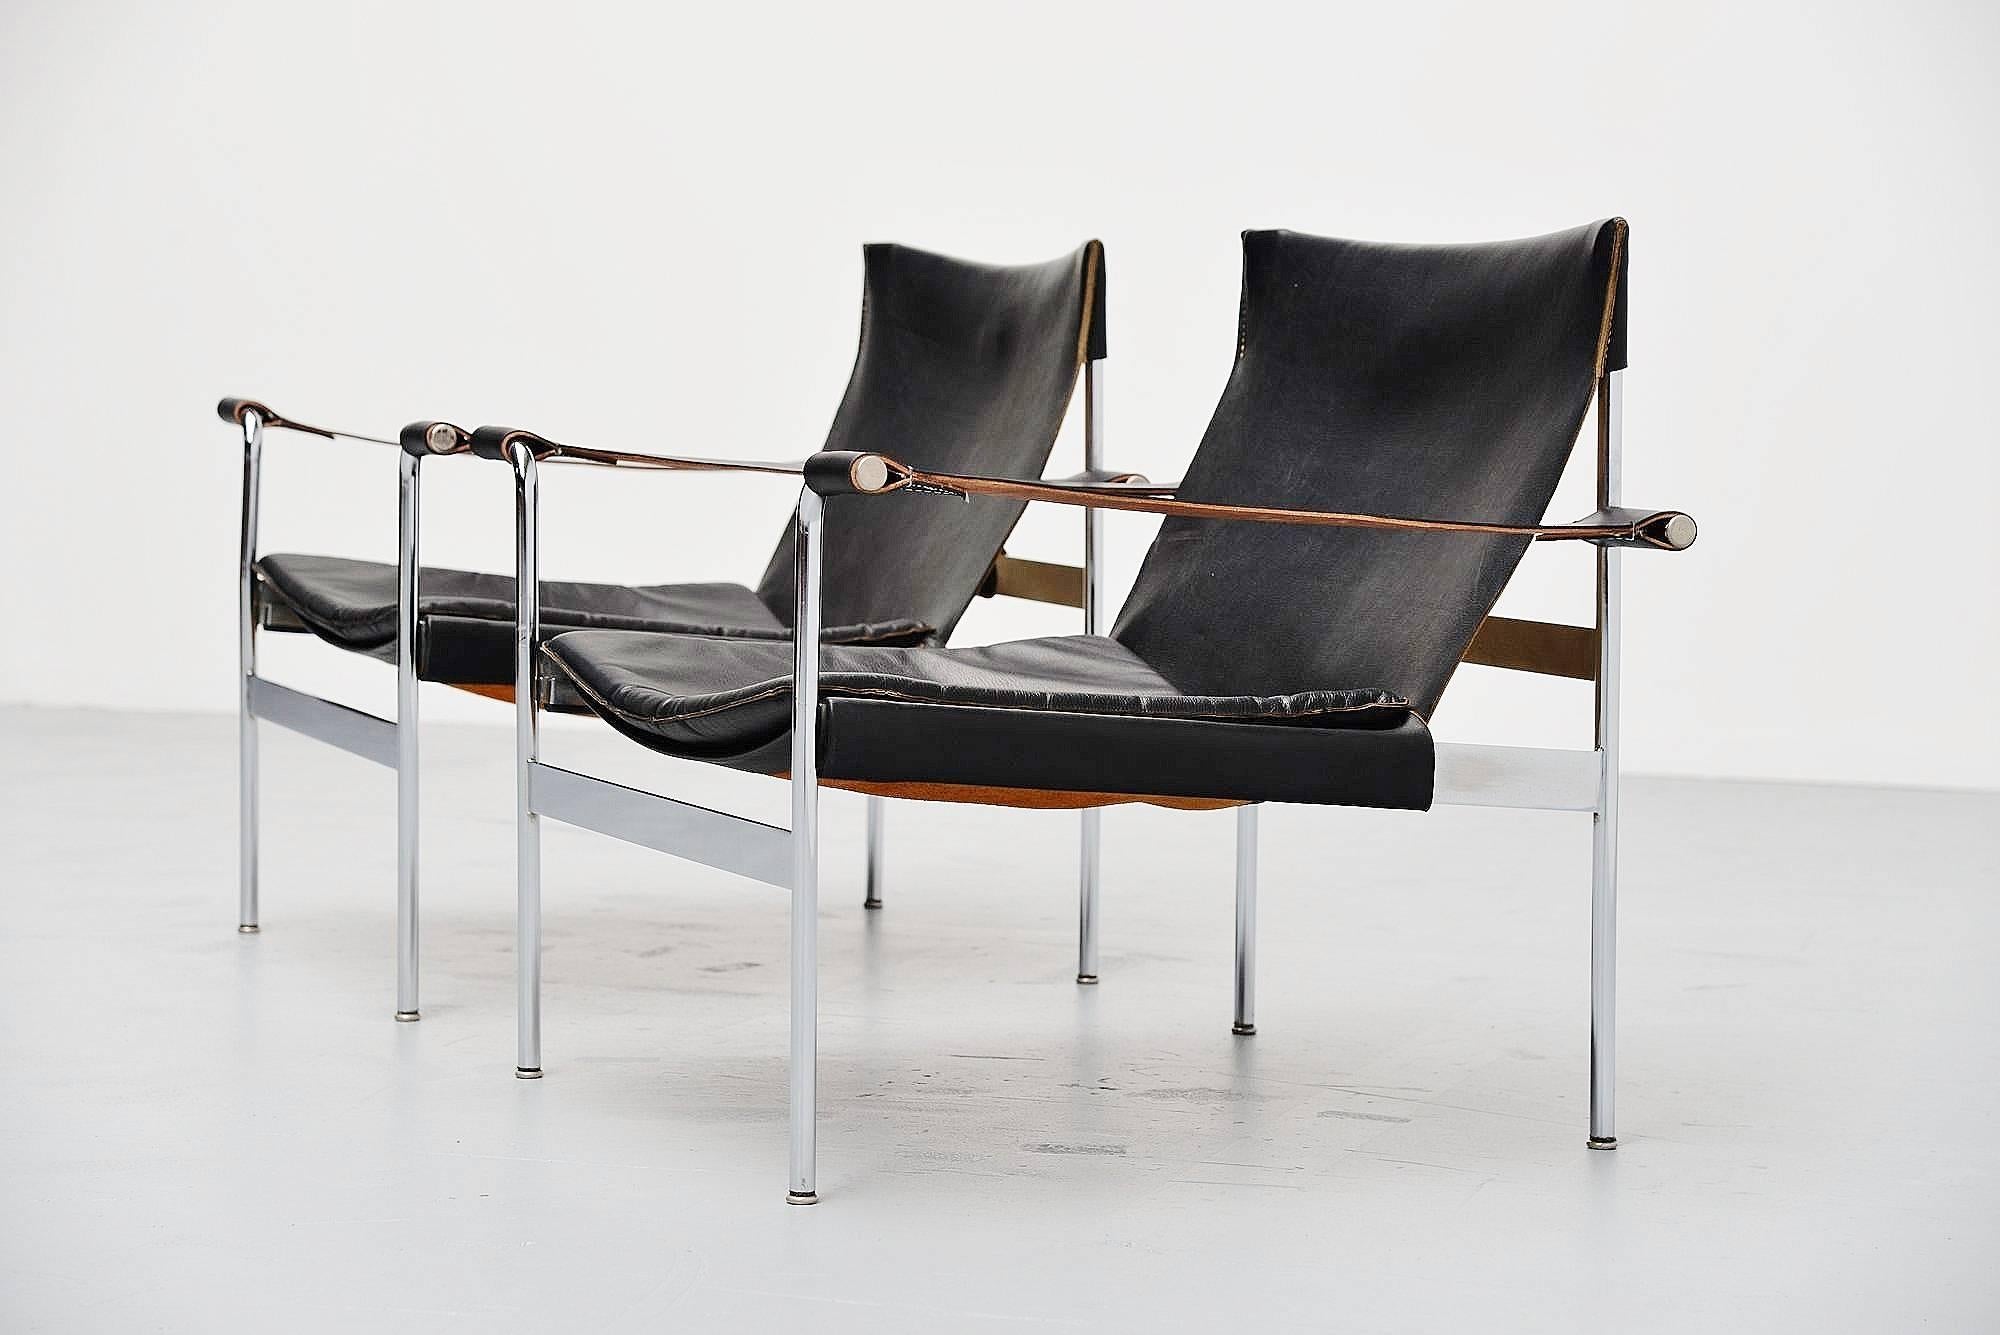 Nice pair of lounge chairs designed by Hans Könecke, manufactured by Tecta, Germany, 1965. Hans Könecke was the founder of Tecta, Germany furniture making company. He was head of the design department for many years. These chairs Model D99 were